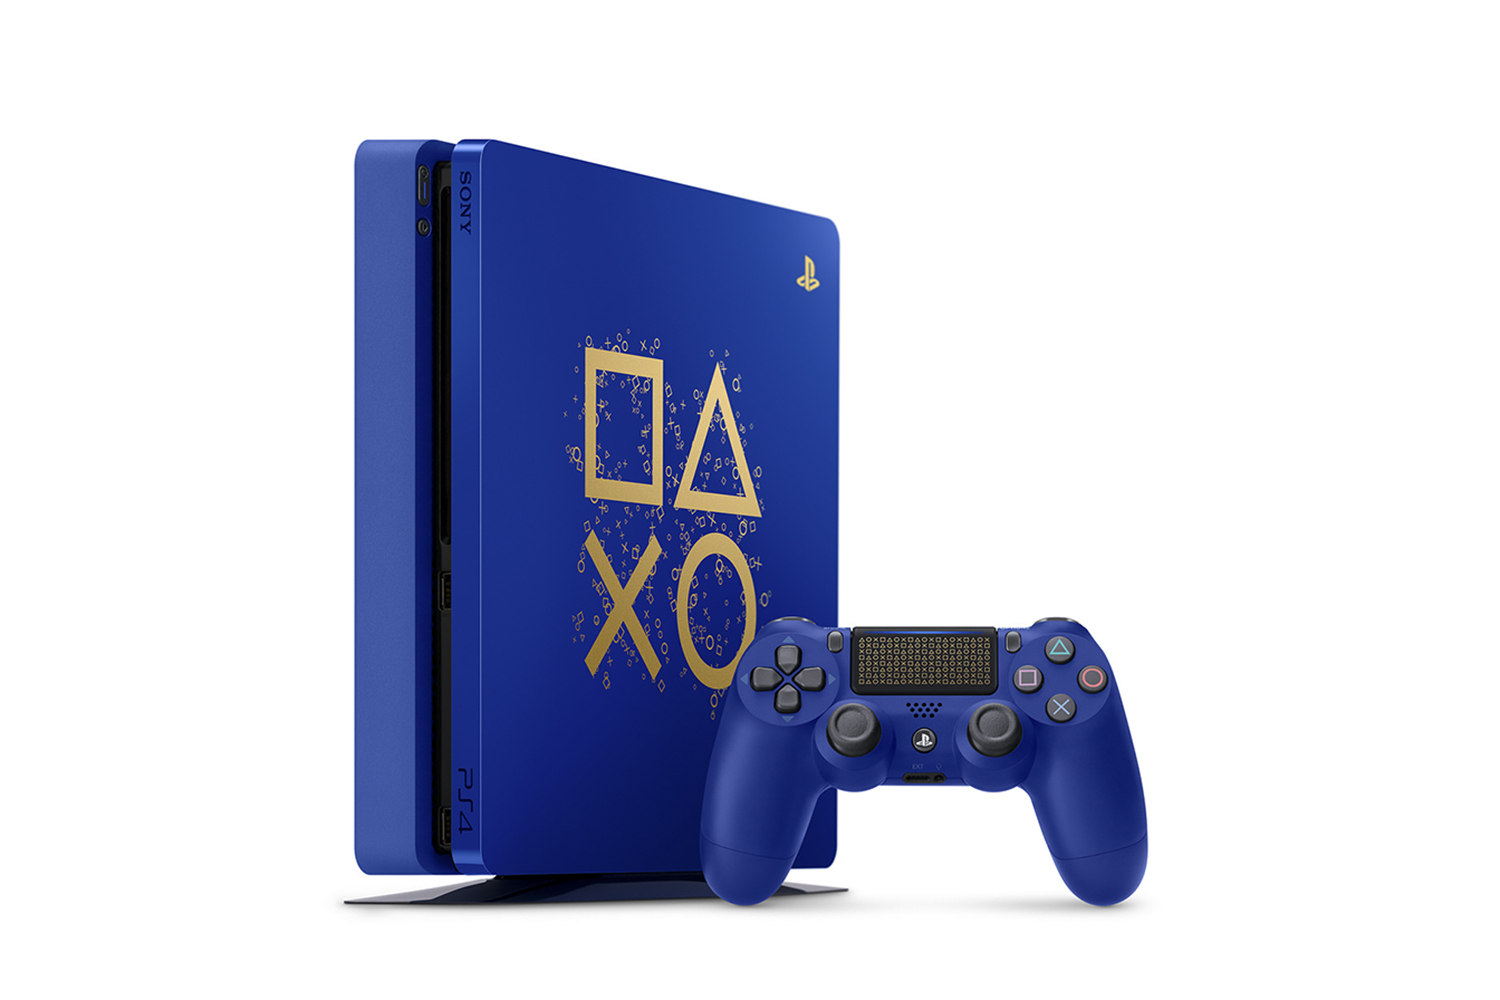 Playstation 4 Days of Play Limited Edition 1TB Slim Console with Extra Gold  Dualshock 4 Wireless Controller Bundle